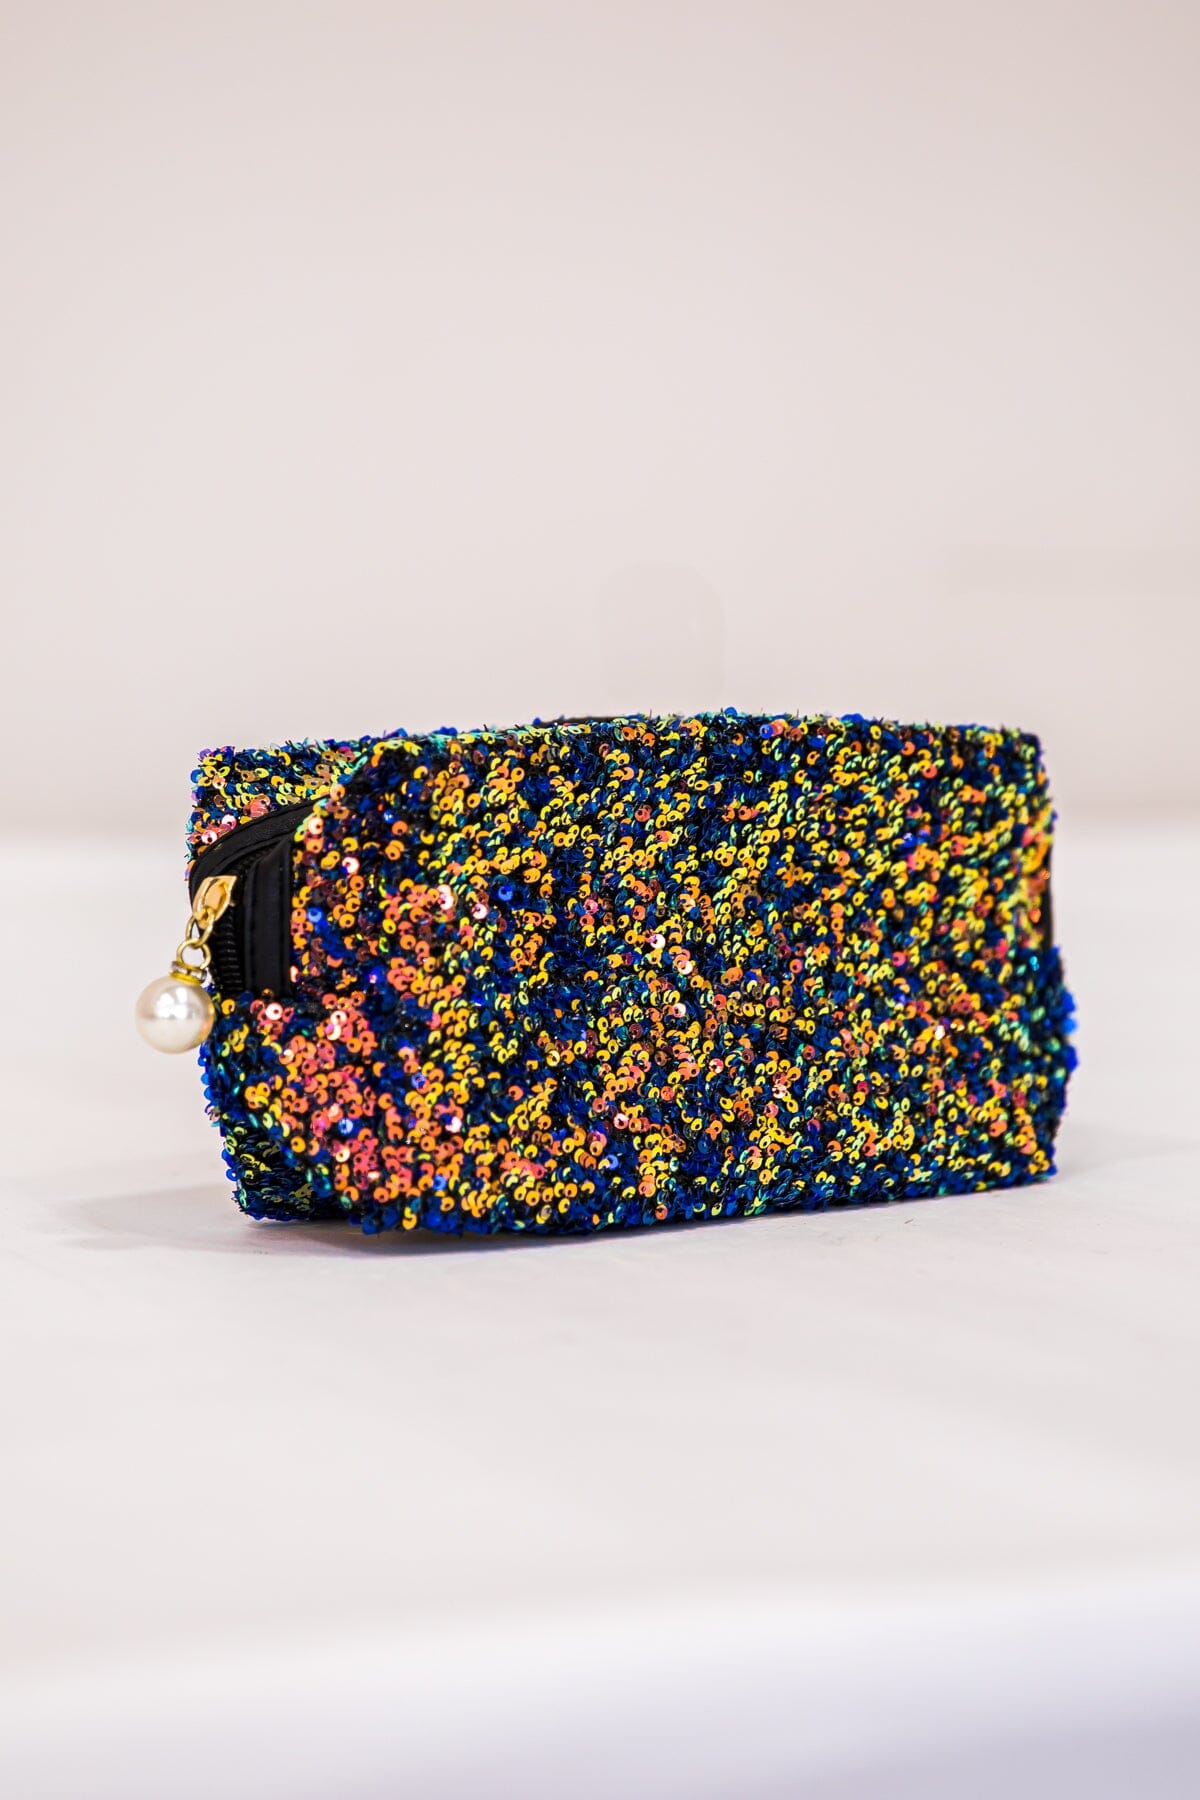 Black Multicolor Sequin Makeup Bag - Filly Flair